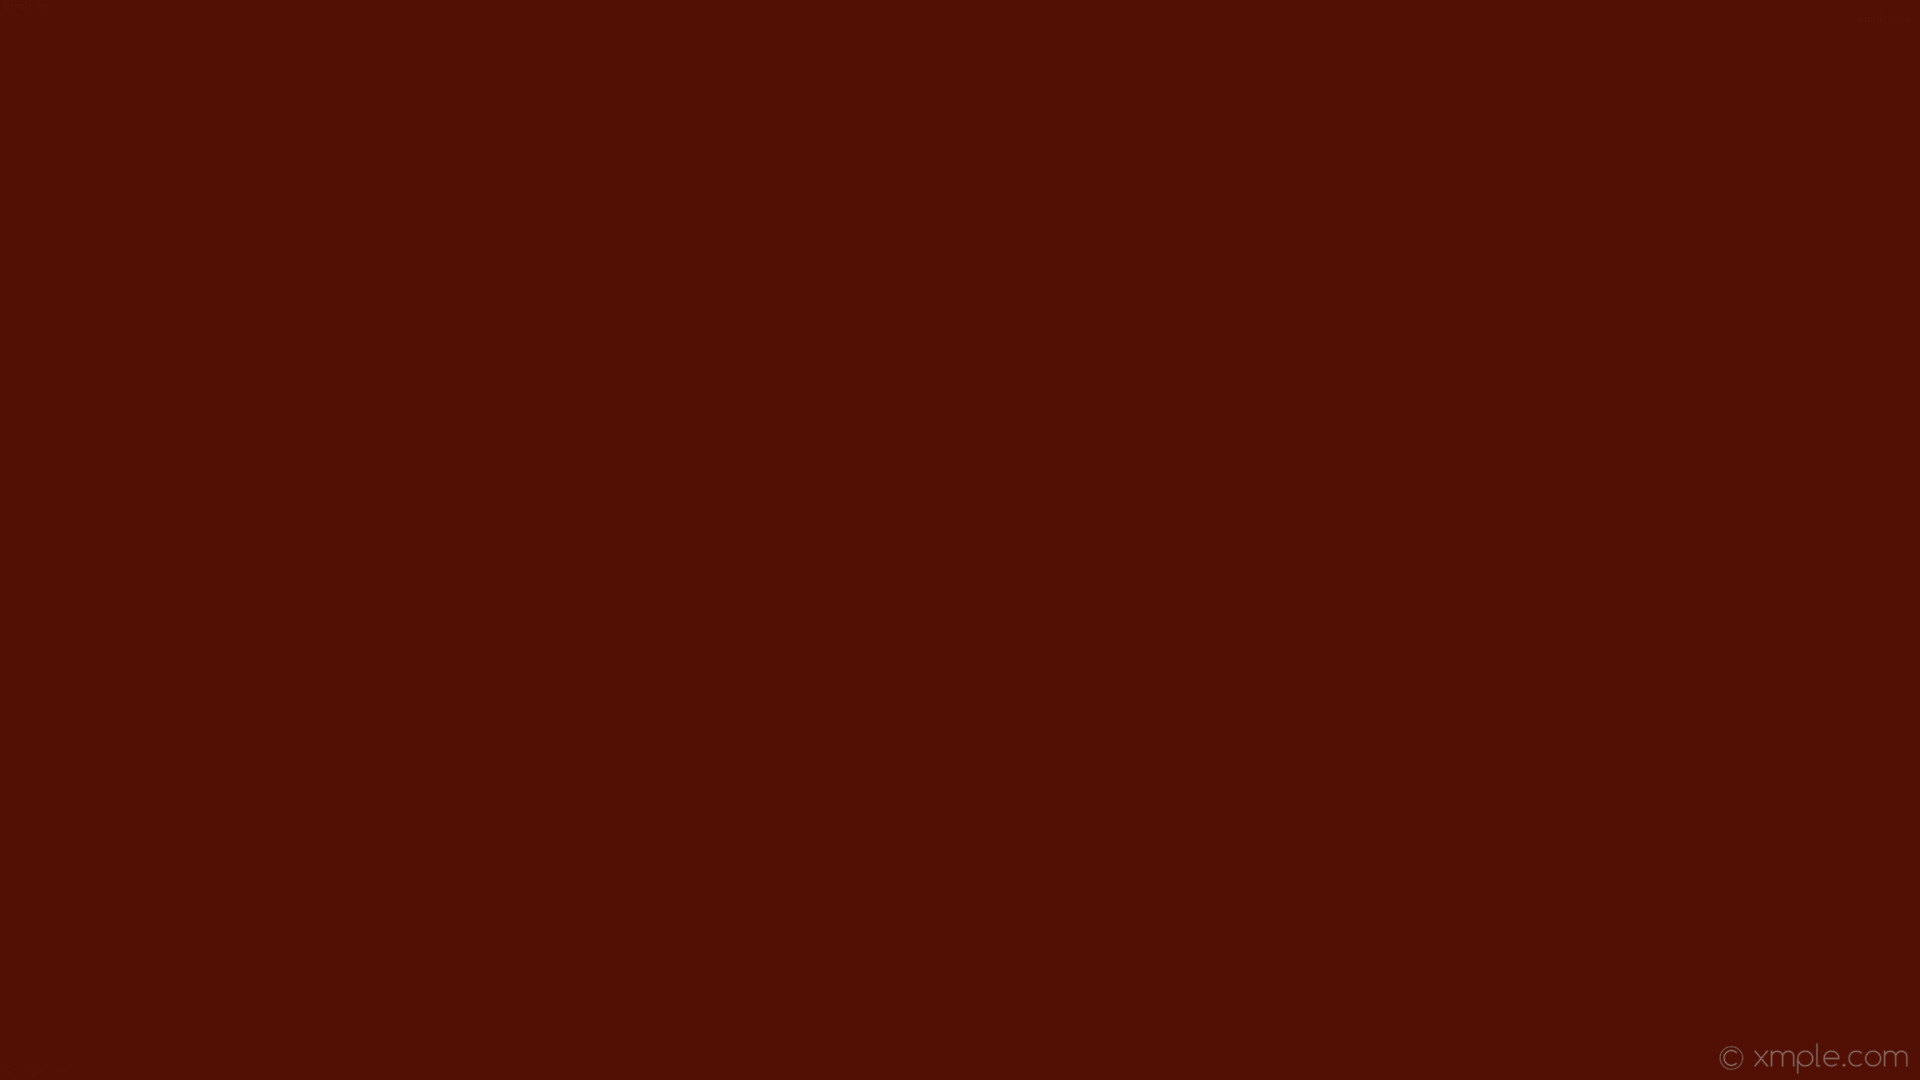 1920x1080 wallpaper solid color one colour plain single red dark red #511003